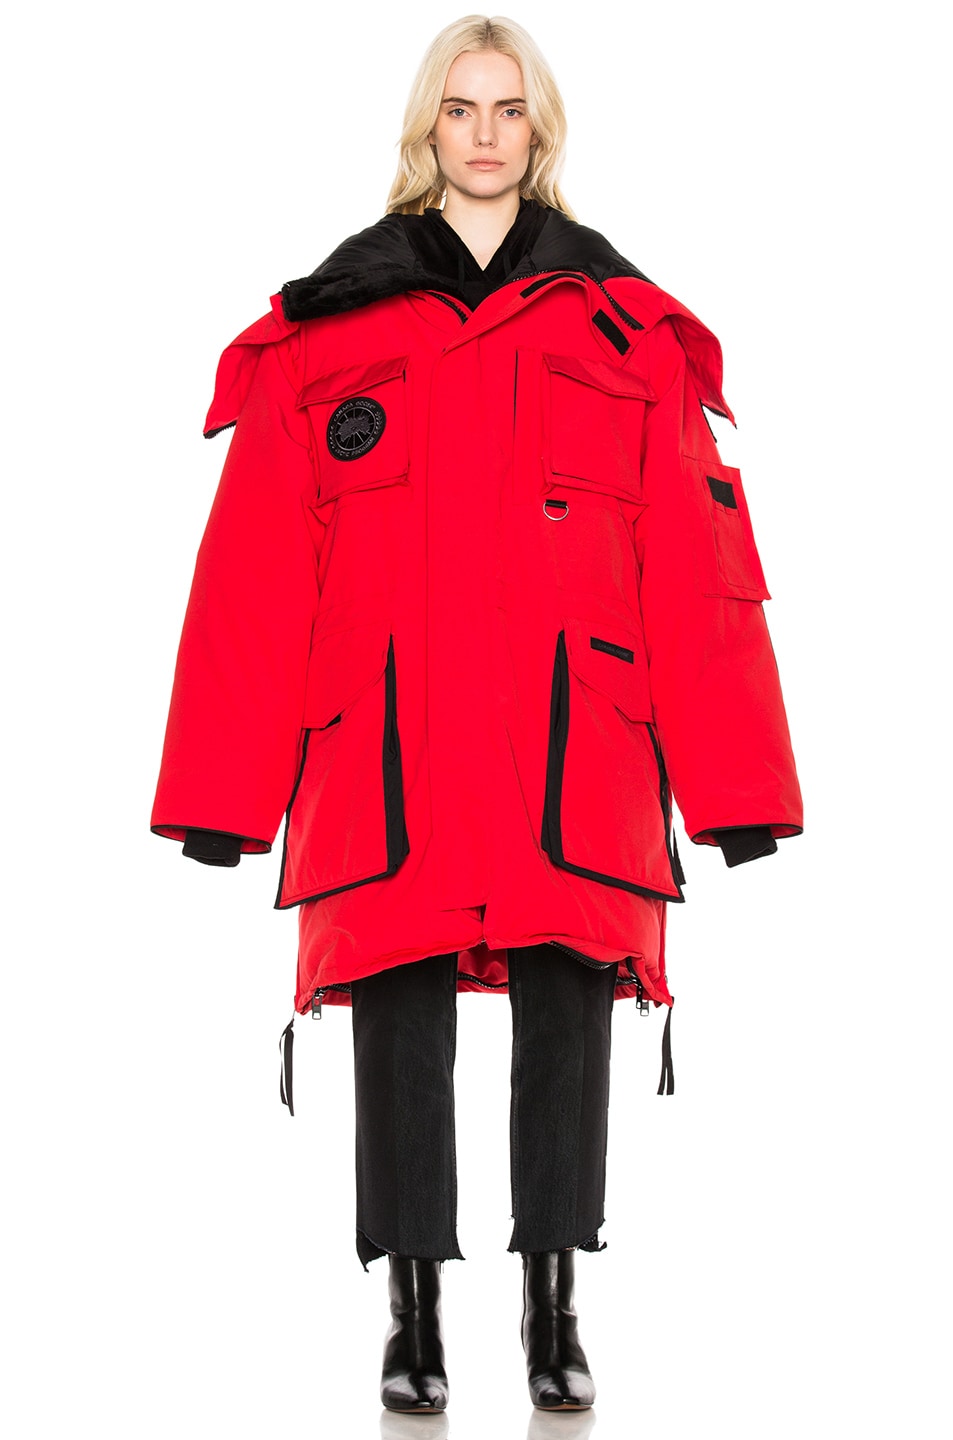 VETEMENTS x Canada Goose Oversized Fold Up Parka in Red | FWRD